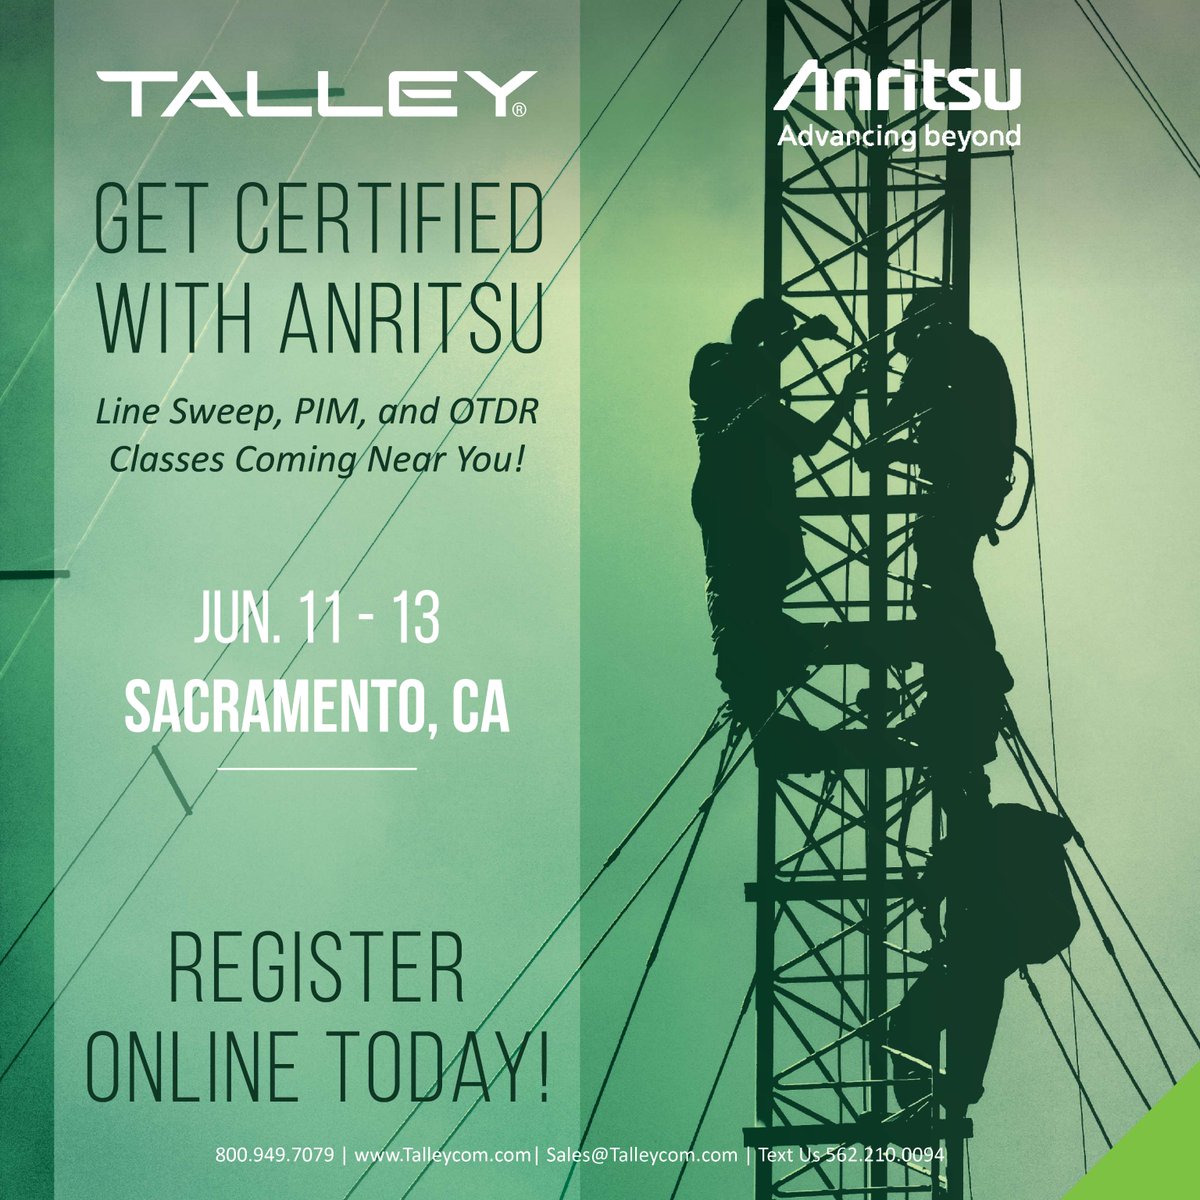 Are you looking to get your team certified for Line Sweep, PIM or OTDR? Check out our 2024 Anritsu Training Schedule and register today! Join us for our upcoming courses in Sacramento, CA. . Register online today: talleycom.com/cert-anritsu-t… #Anritsu #GetCertified